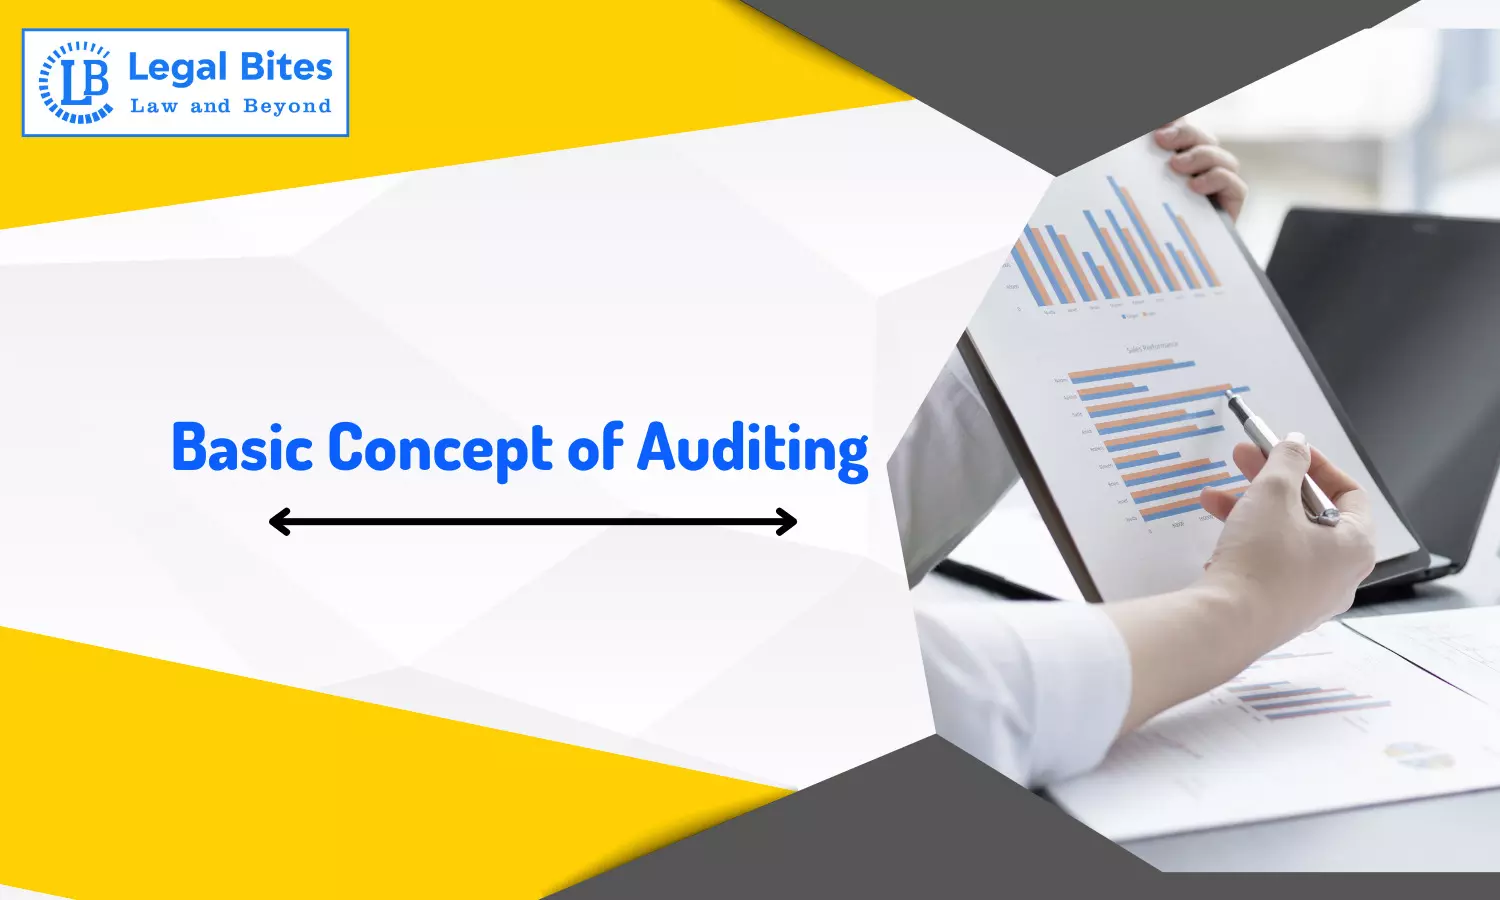 Basic Concept of Auditing